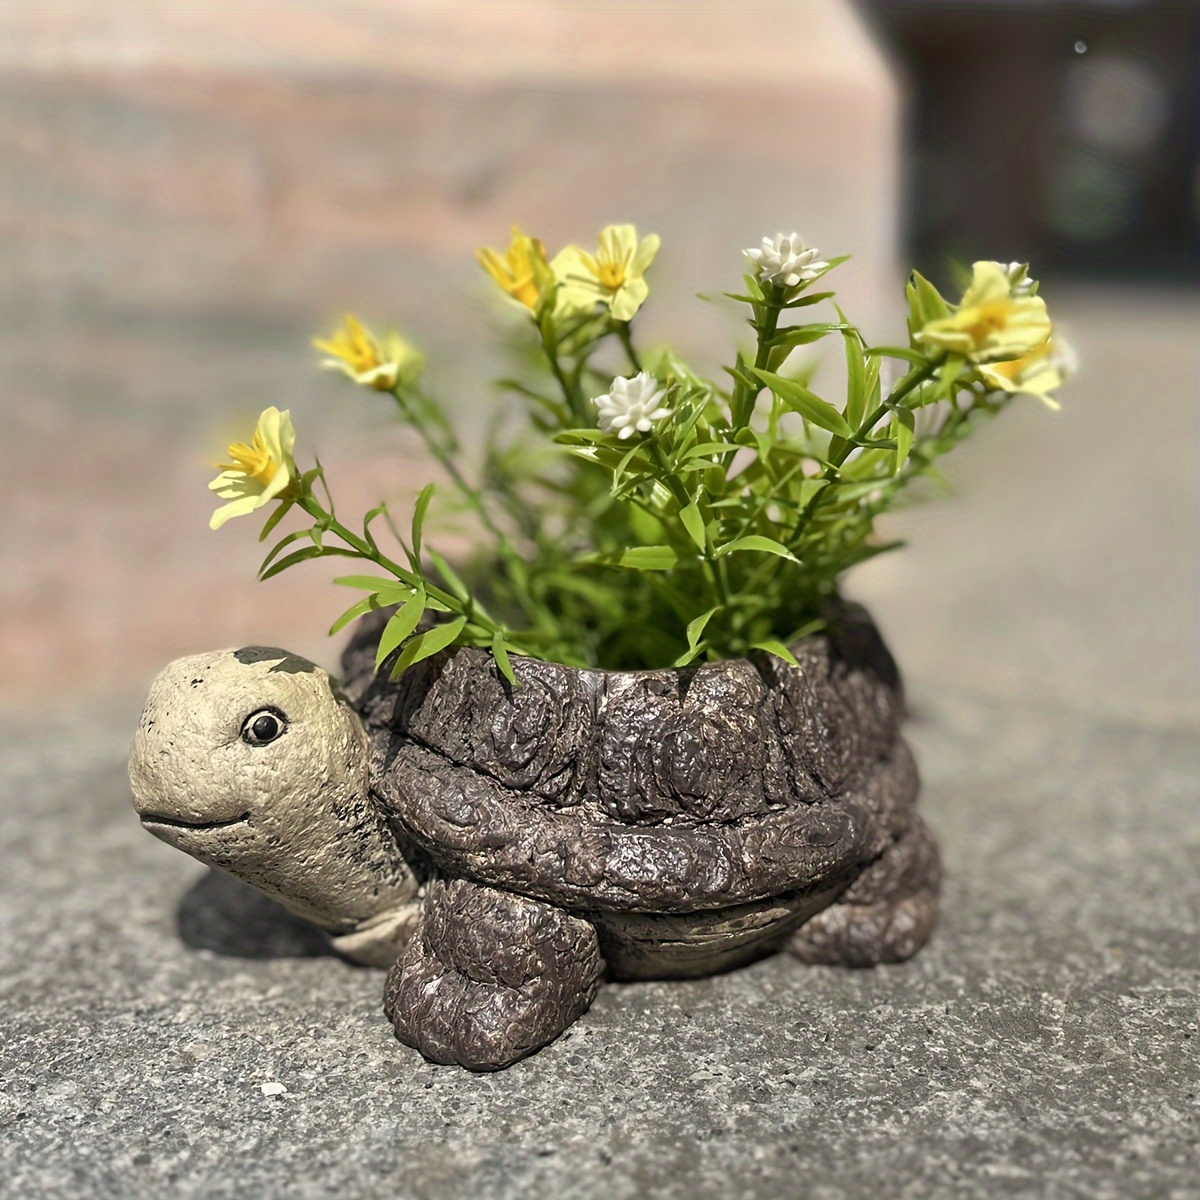 

Resin Turtle Planter Pot - Freestanding Cute Animal Flower Pot For Indoor Lawn Porch Balcony Garden Outdoor Decoration, Electricity-free, Featherless - Decorative Miniature Fairy Garden Accessory